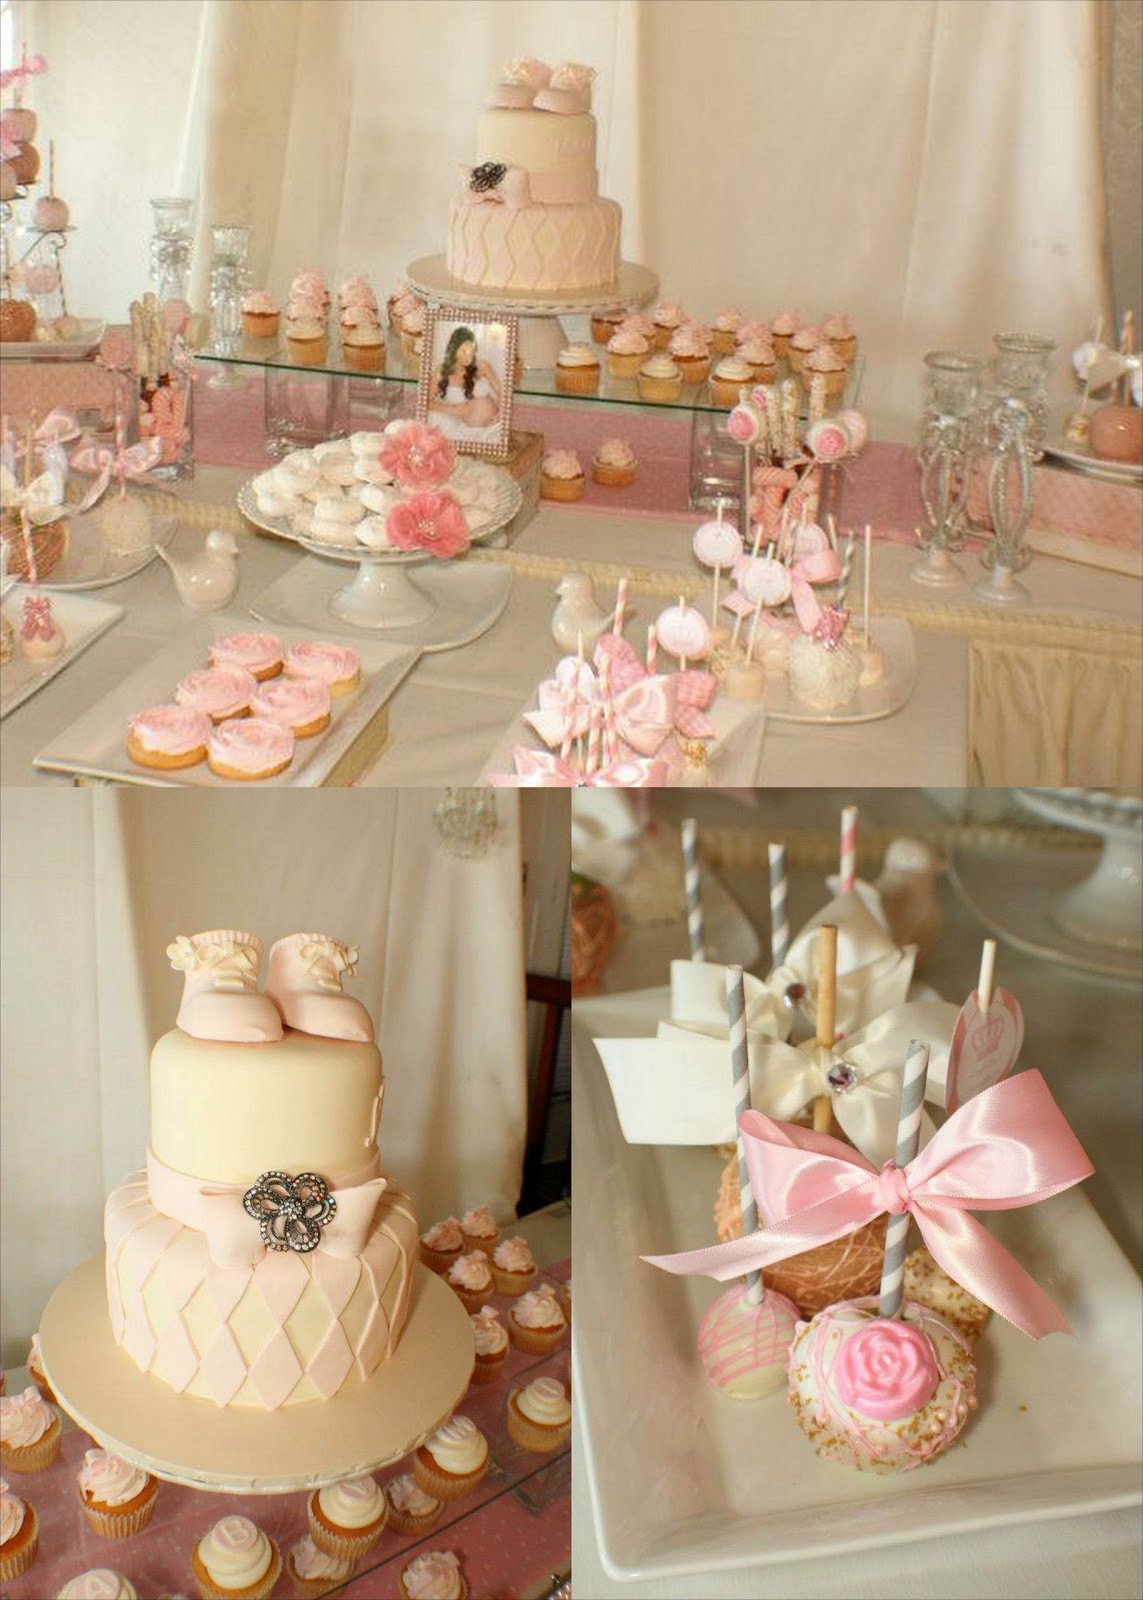 Decoration Ideas For Baby Shower
 MKR Creations Shabby Chic Baby Shower